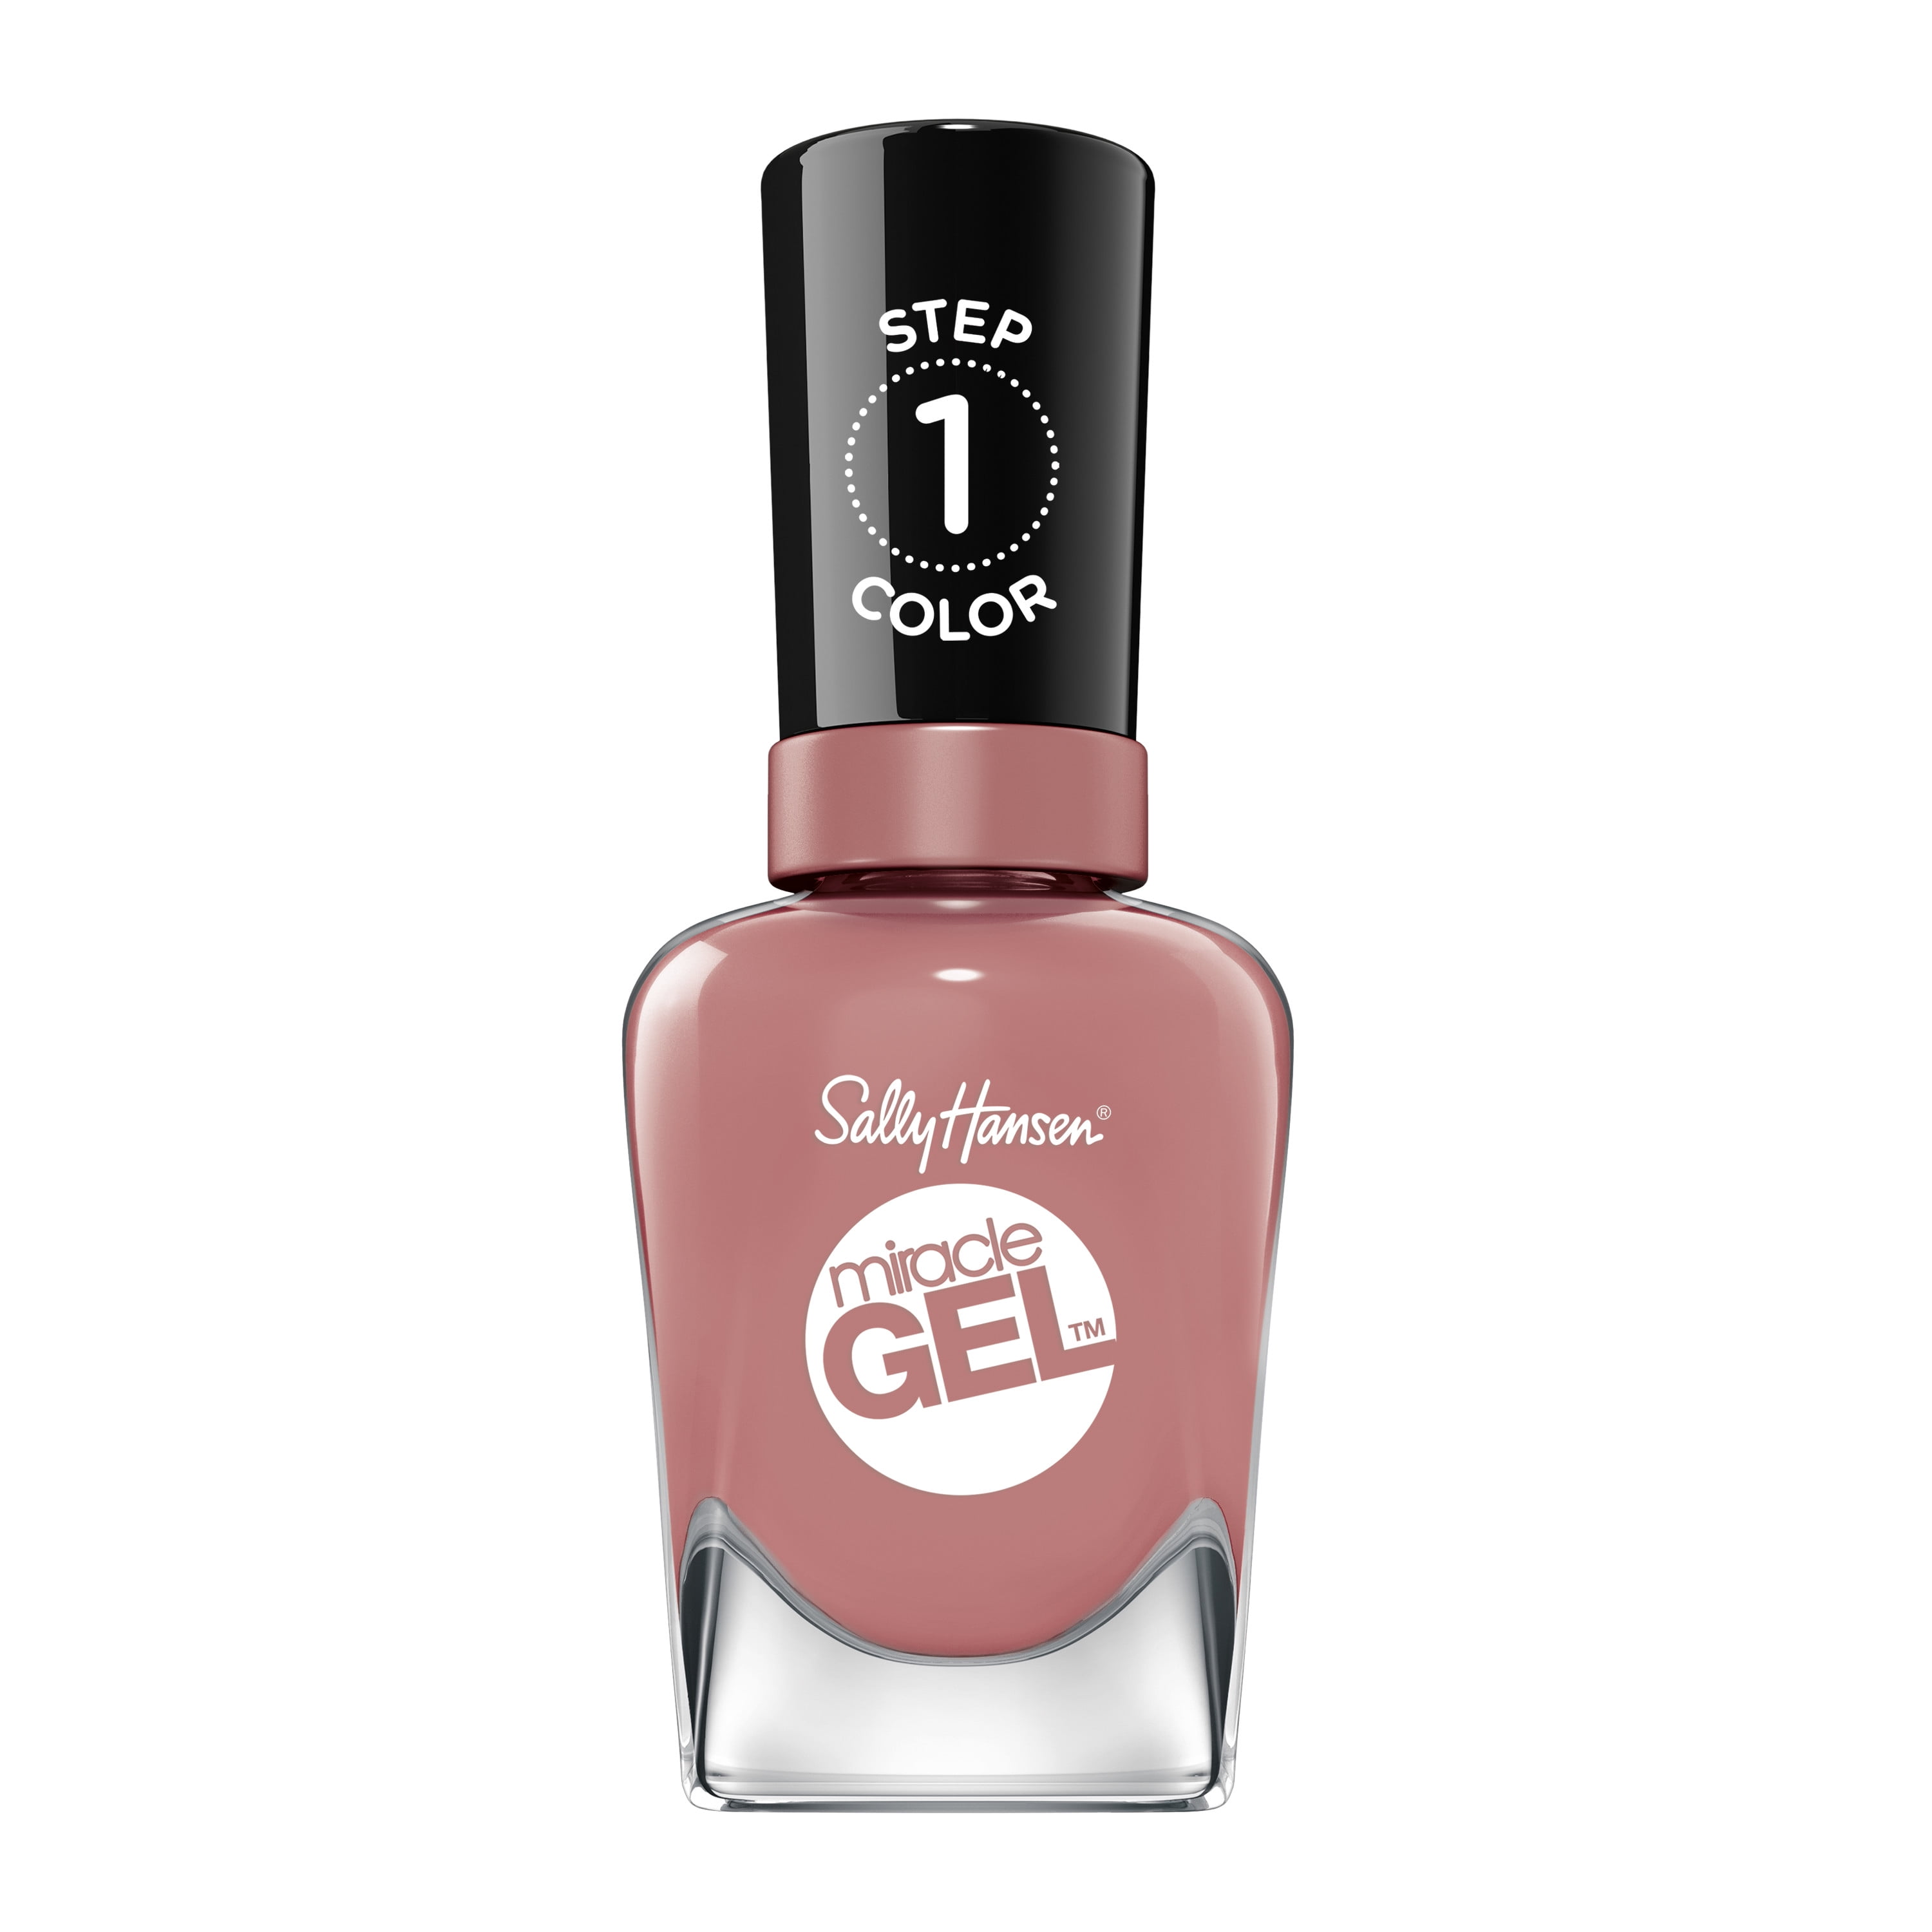 Sally Hansen Miracle Gel Nail Color, Hue There?,  oz, At Home Gel Nail  Polish, Gel Nail Polish, No UV Lamp Needed, Long Lasting, Chip Resistant -  